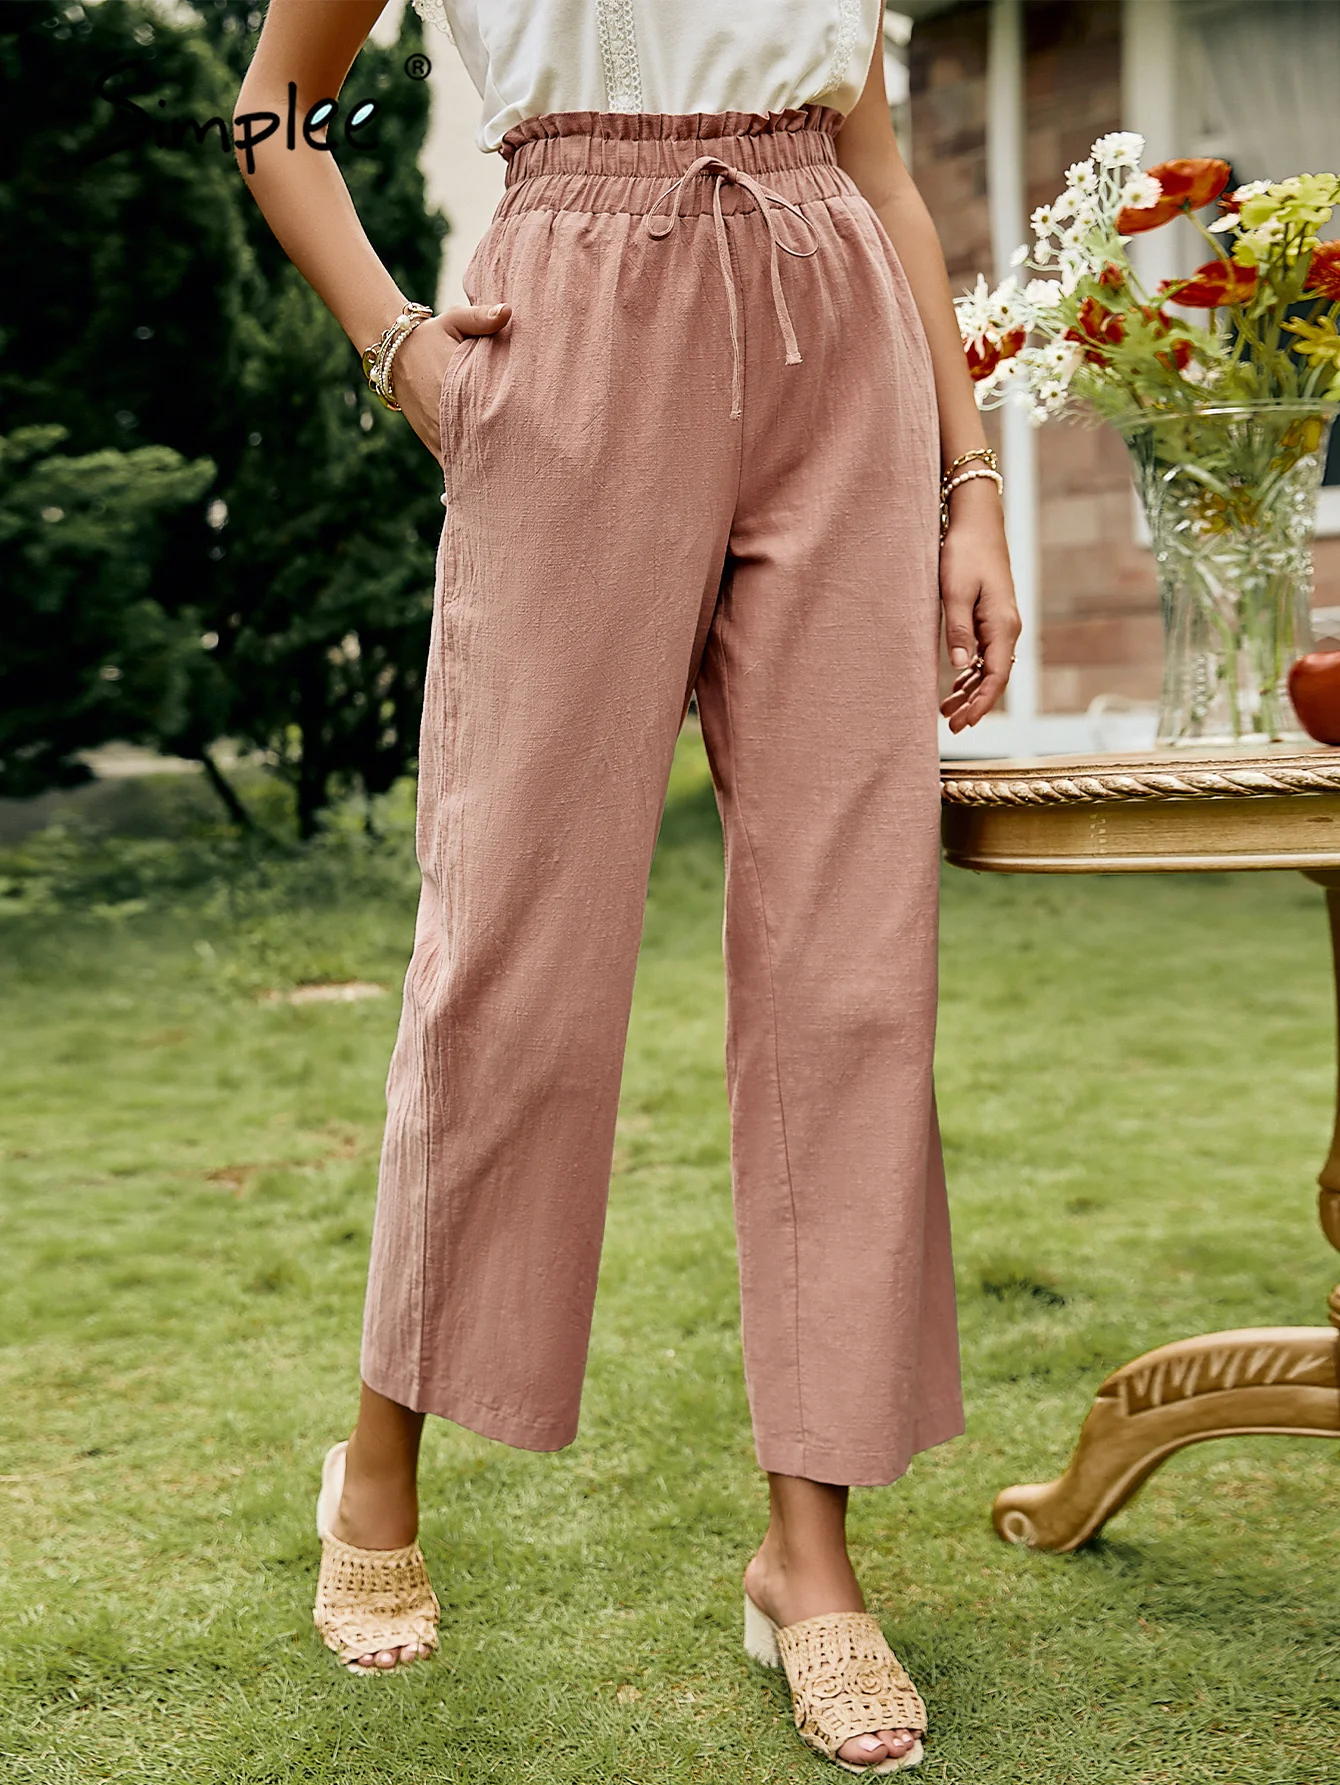 fartey Cotton Linen Pants for Women Summer Casual Loose Trousers Embroidered Wide-Leg Pants with Pockets 